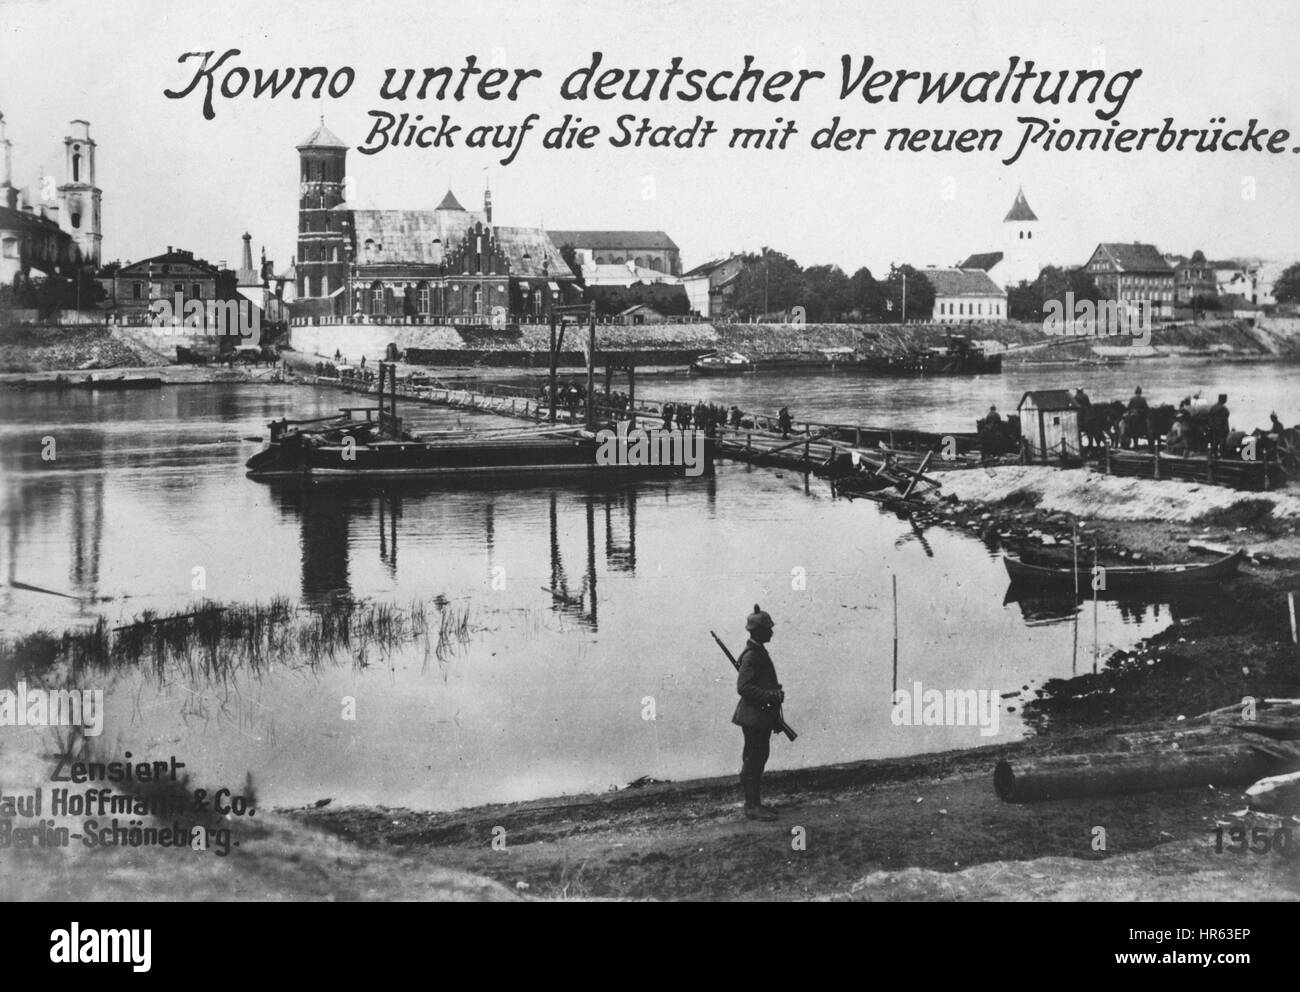 The city of Kowno, Lithuania under German occupation during World War I, 1914. From the New York Public Library. Stock Photo